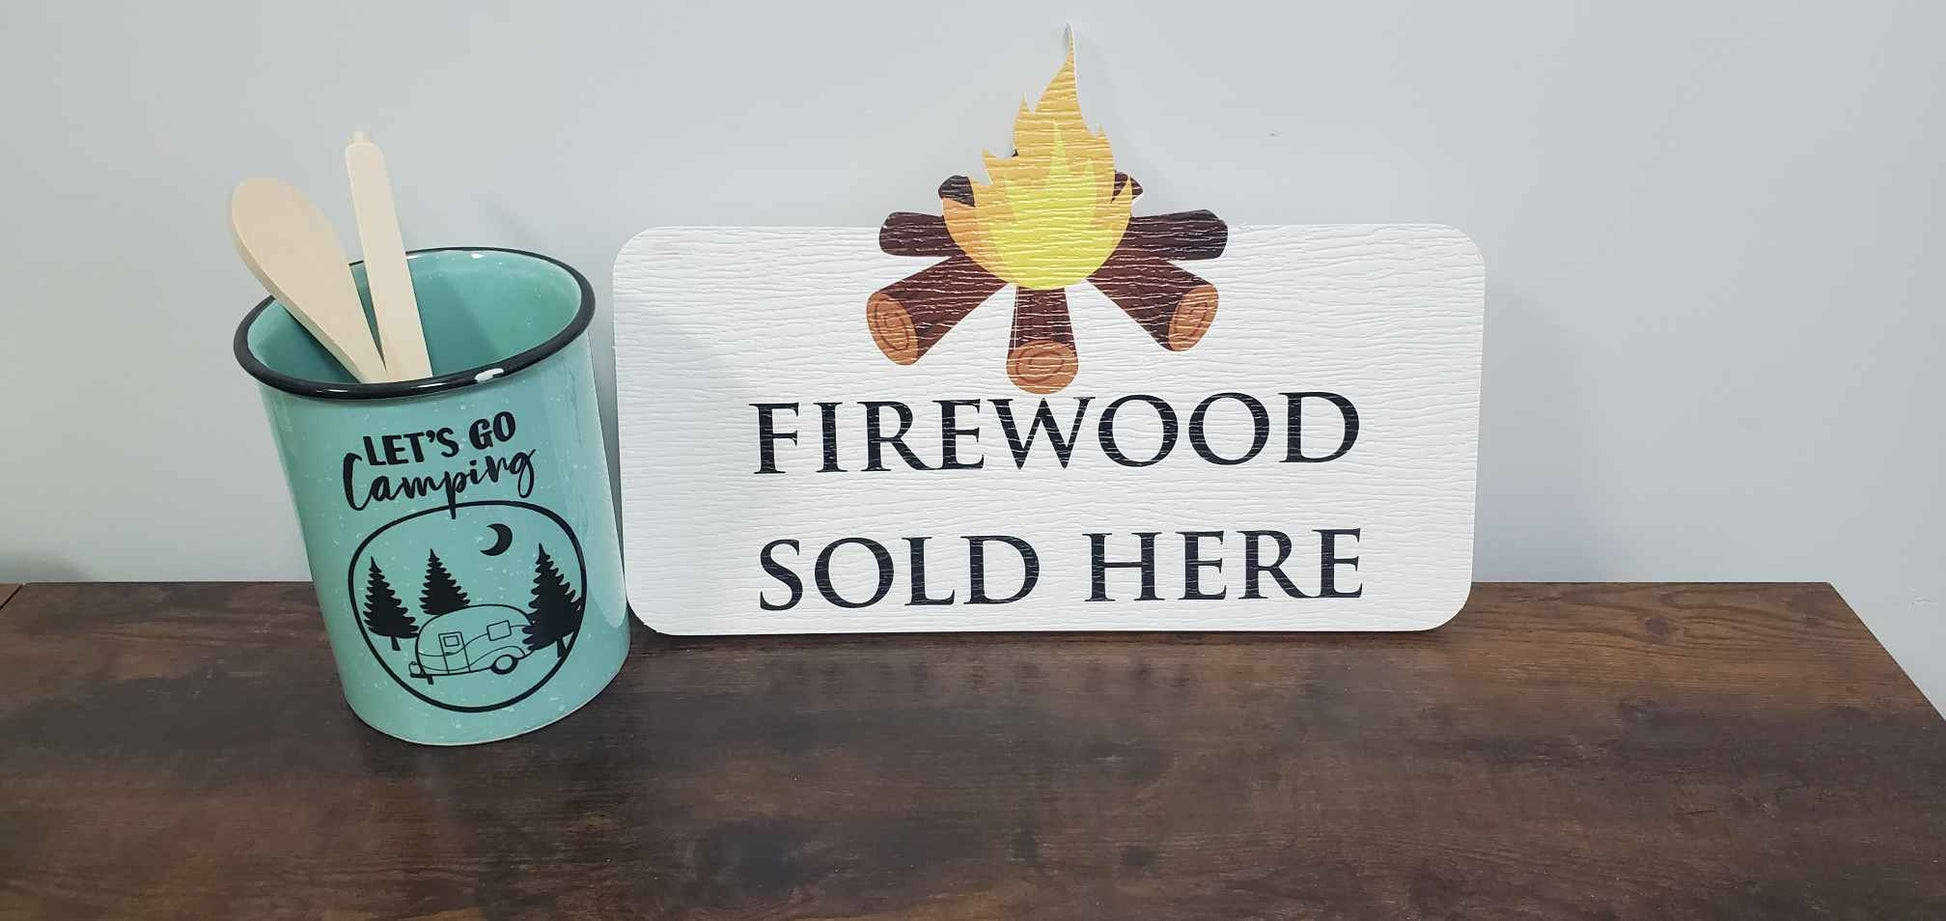 Contour Fire Wood Sold Here Sign Outdoor Weather Proof Camping Campsite Hiking Small Business Bonfire Cabin Lodge PVC Textured Woodgrain